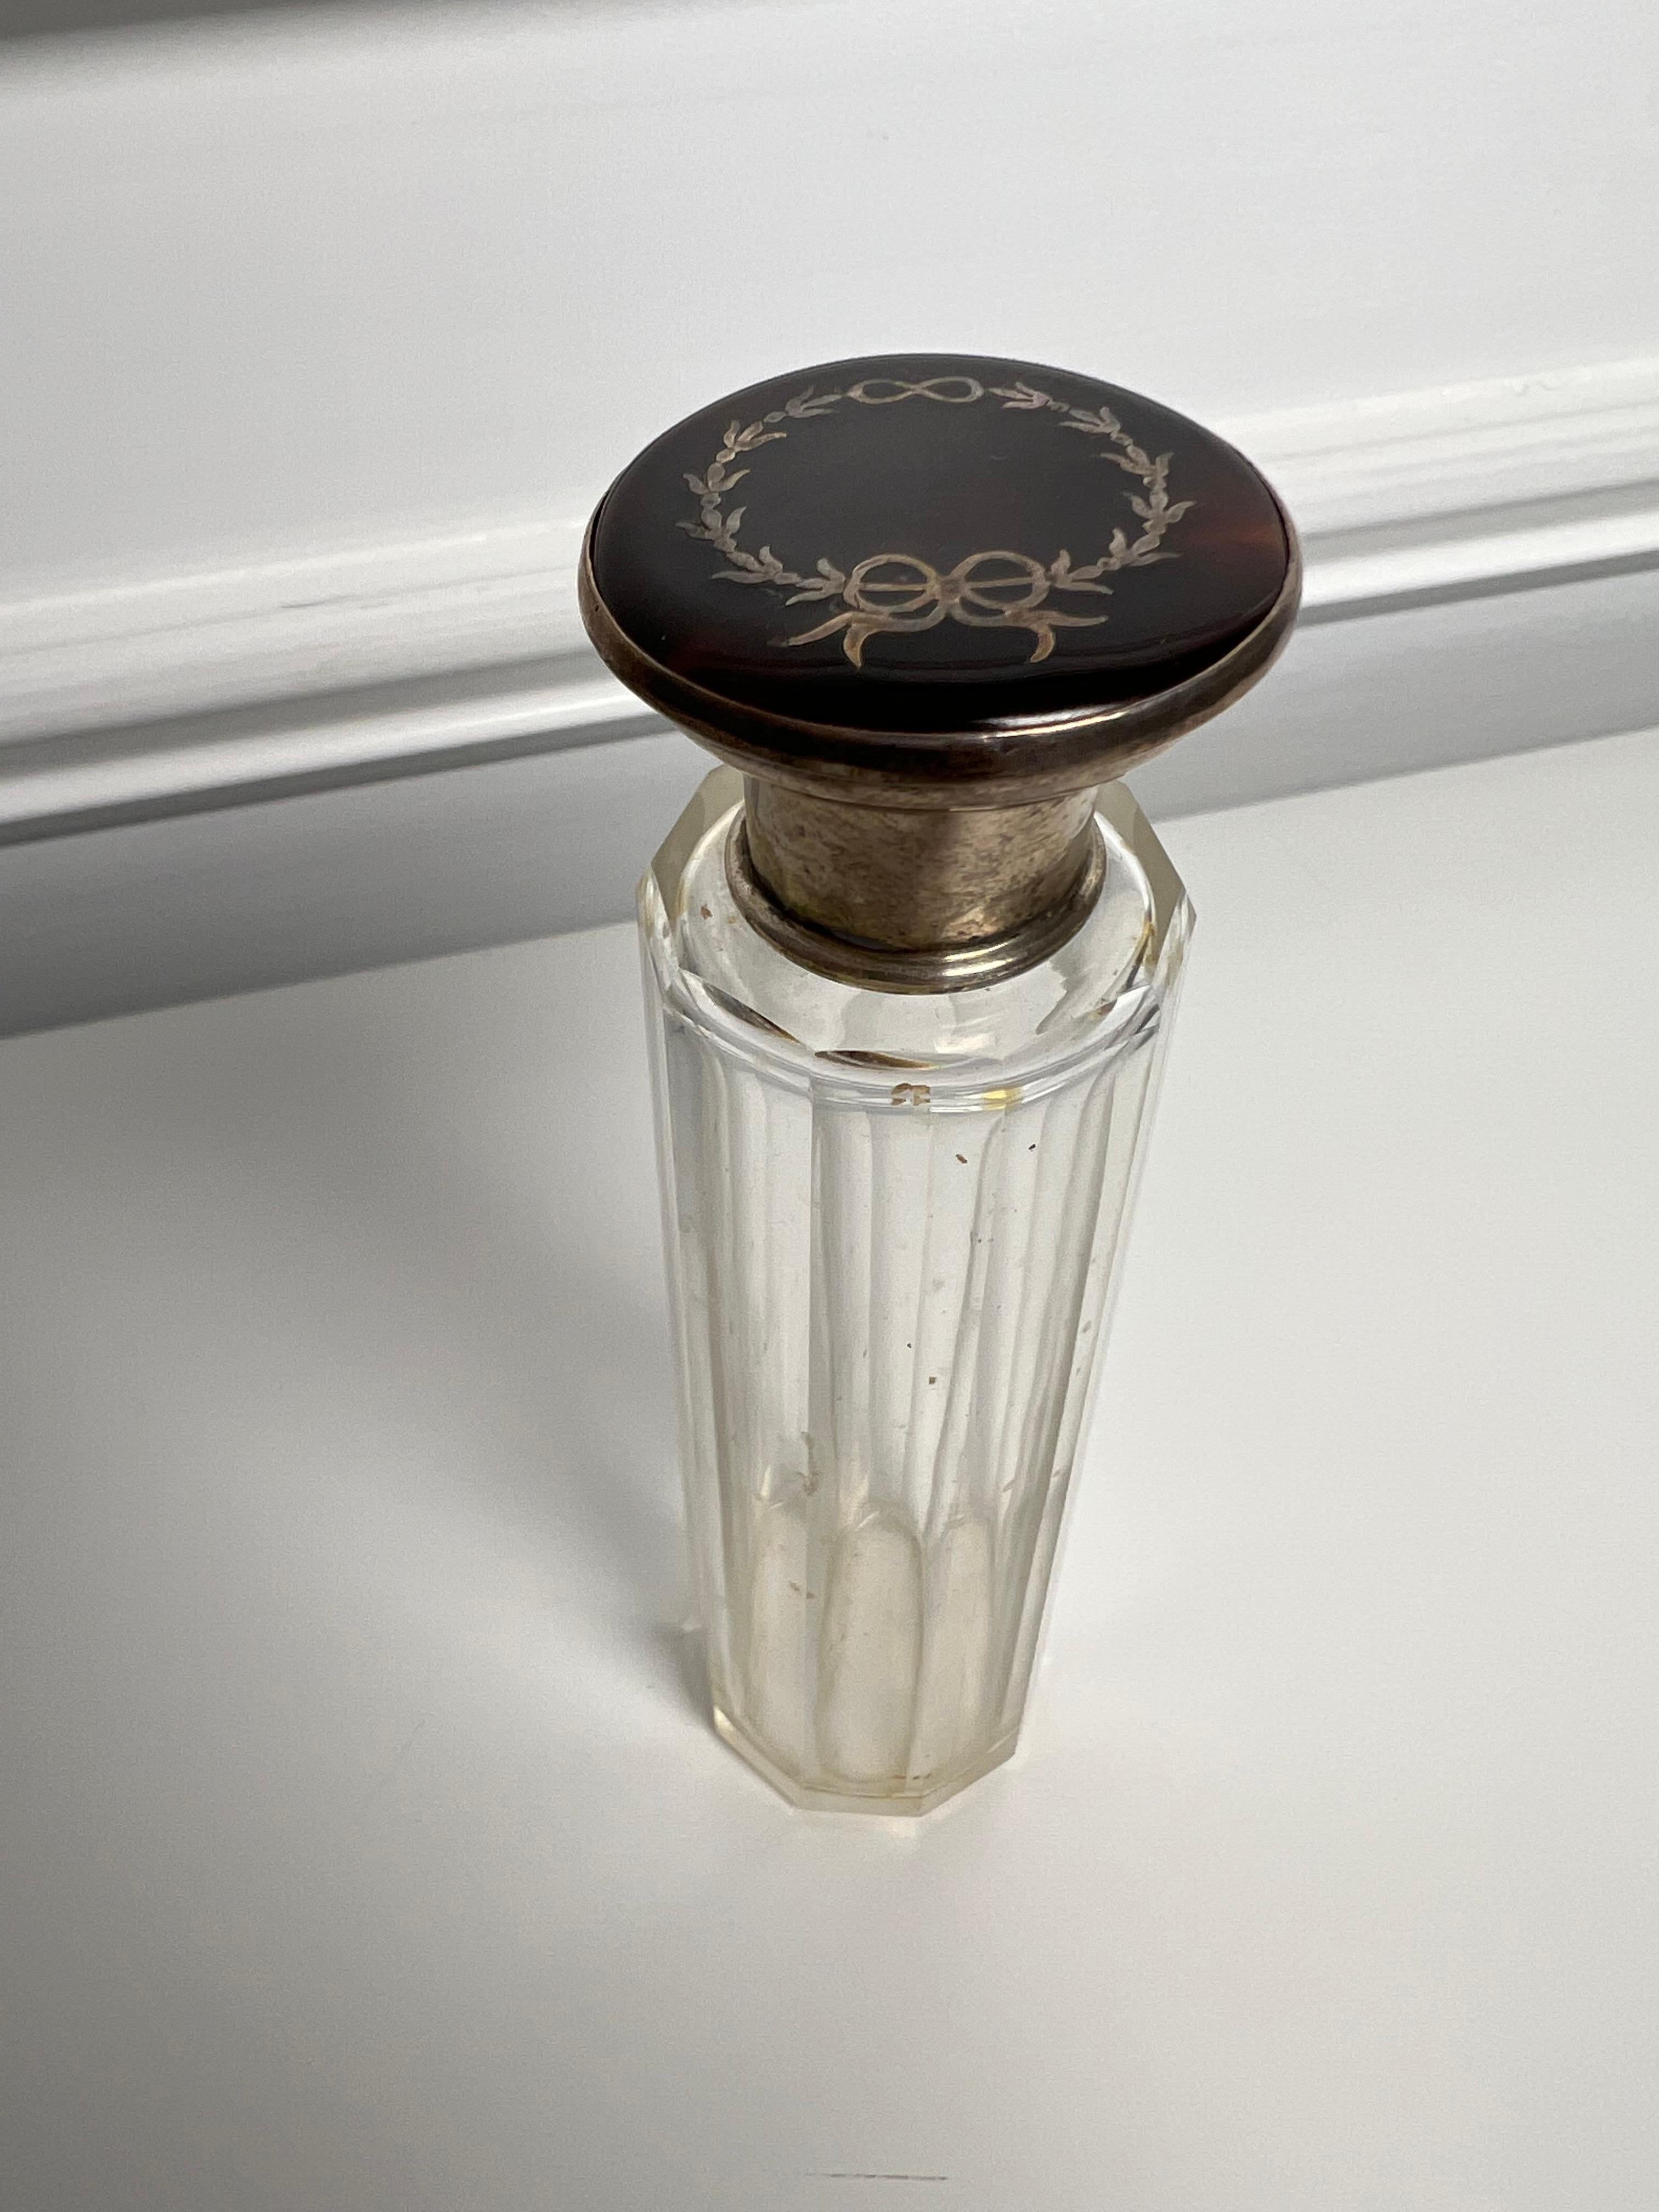 This is a nice early 20th century glass jar with a tortoise shell lid with sterling silver inlay. The jar is 10 sided with a sterling silver rim and is a unique size. Purchased by a private collector in Birmingham England who traveled the world